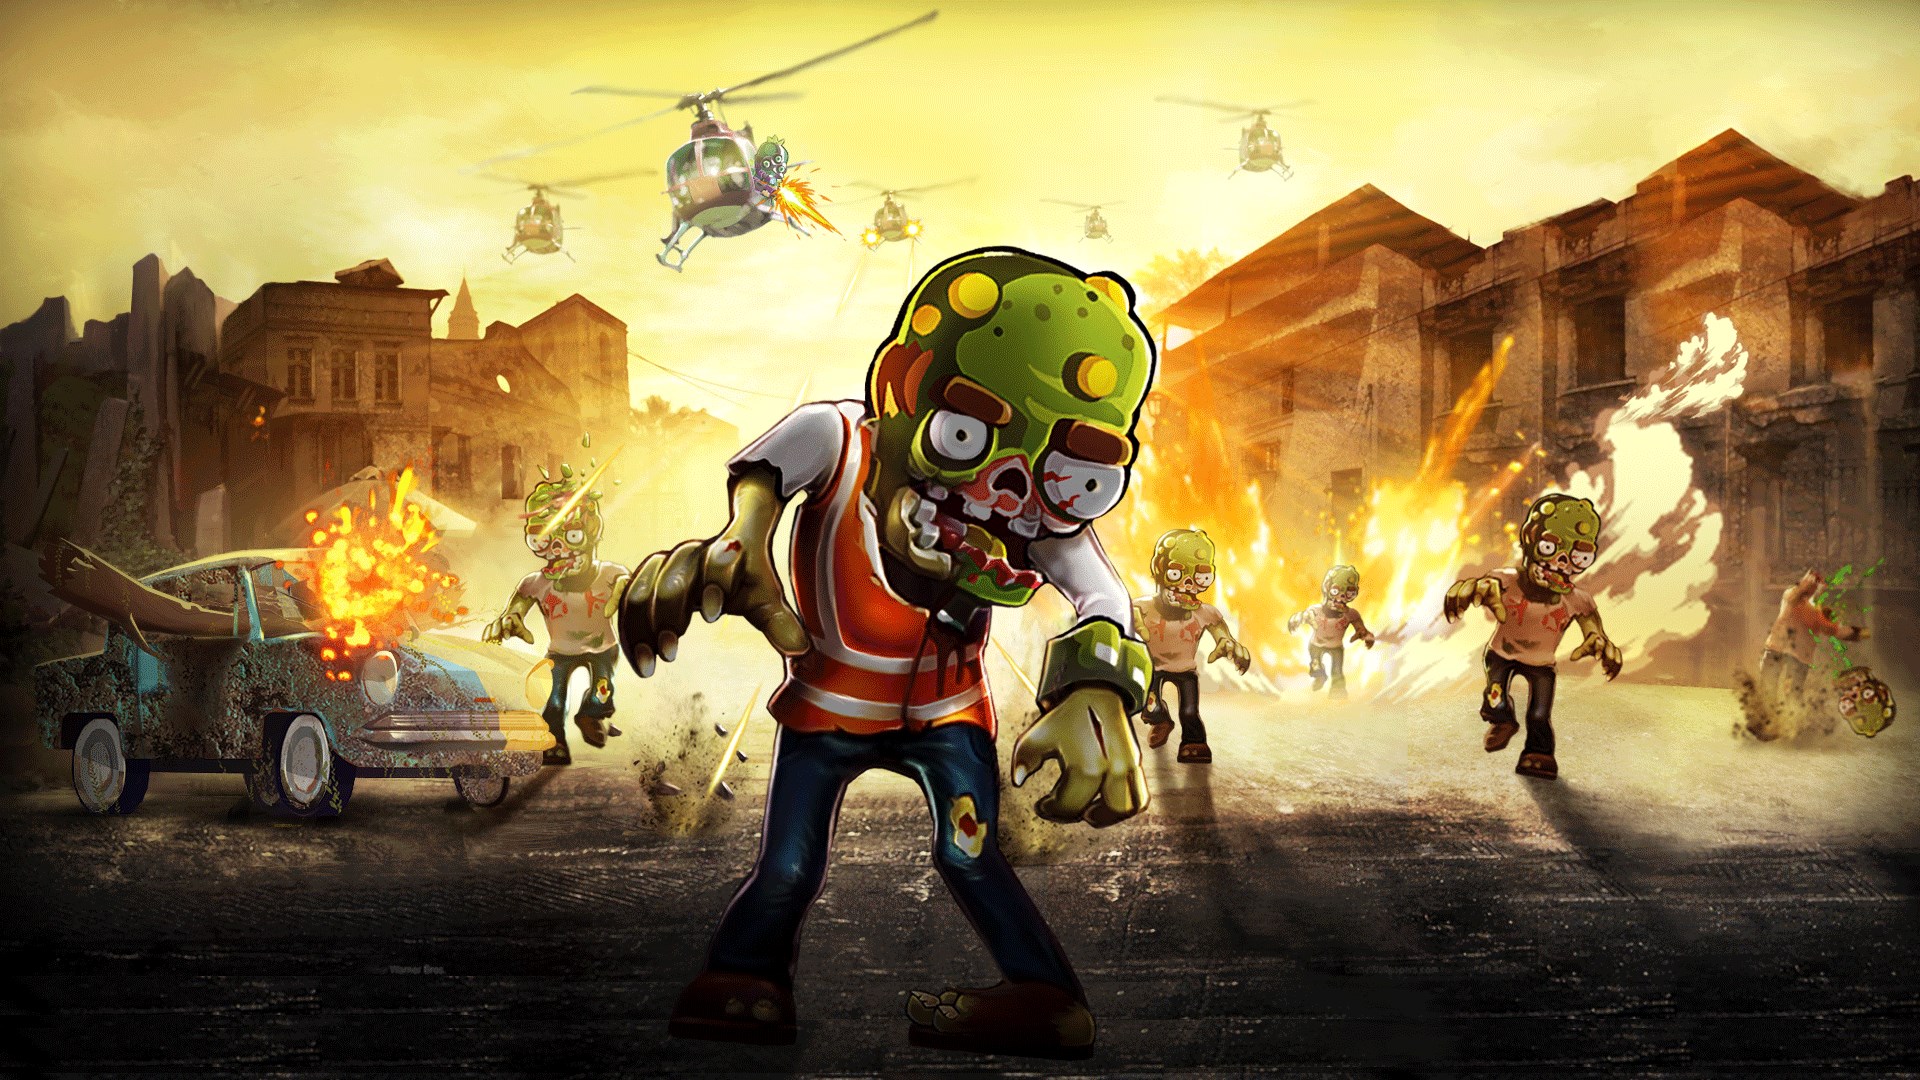 Grab Plants vs. Zombies Game of the Year Edition For Free in